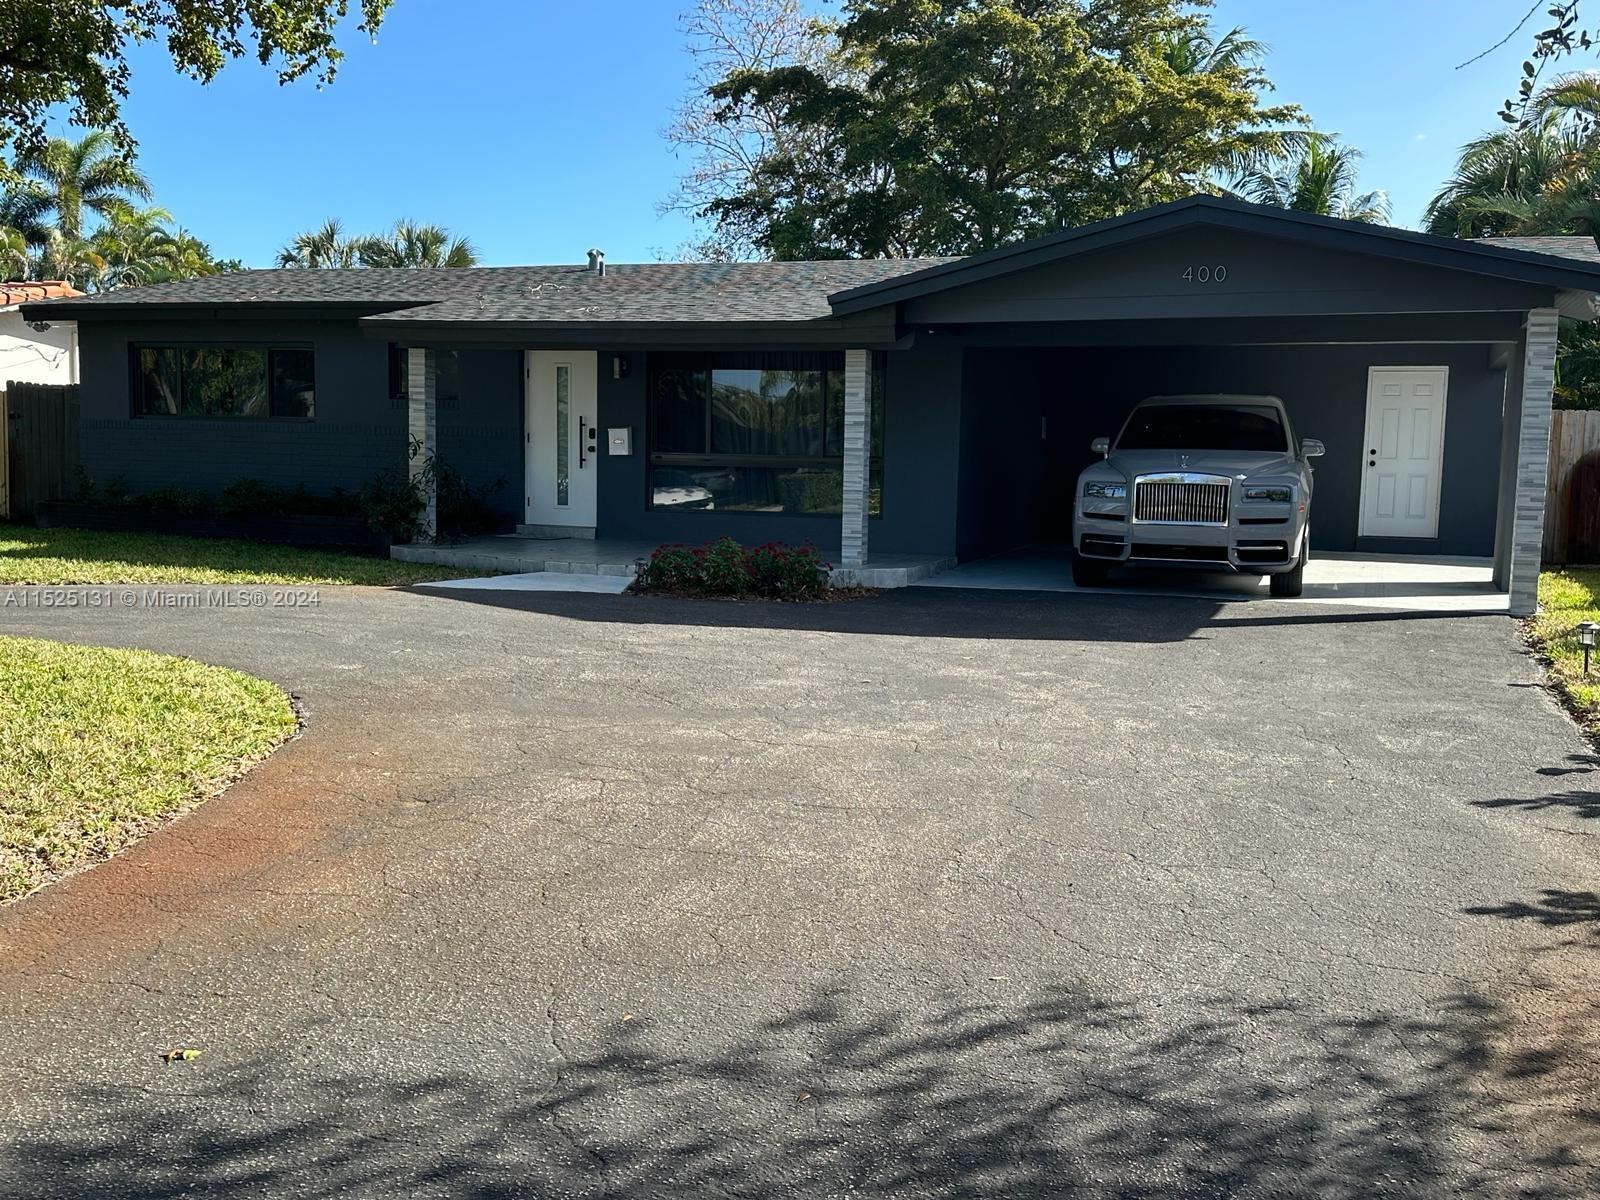 Experience modern living in this beautiful 4 bedroom, 2 bathroom Wilton Manors home! You'll love the